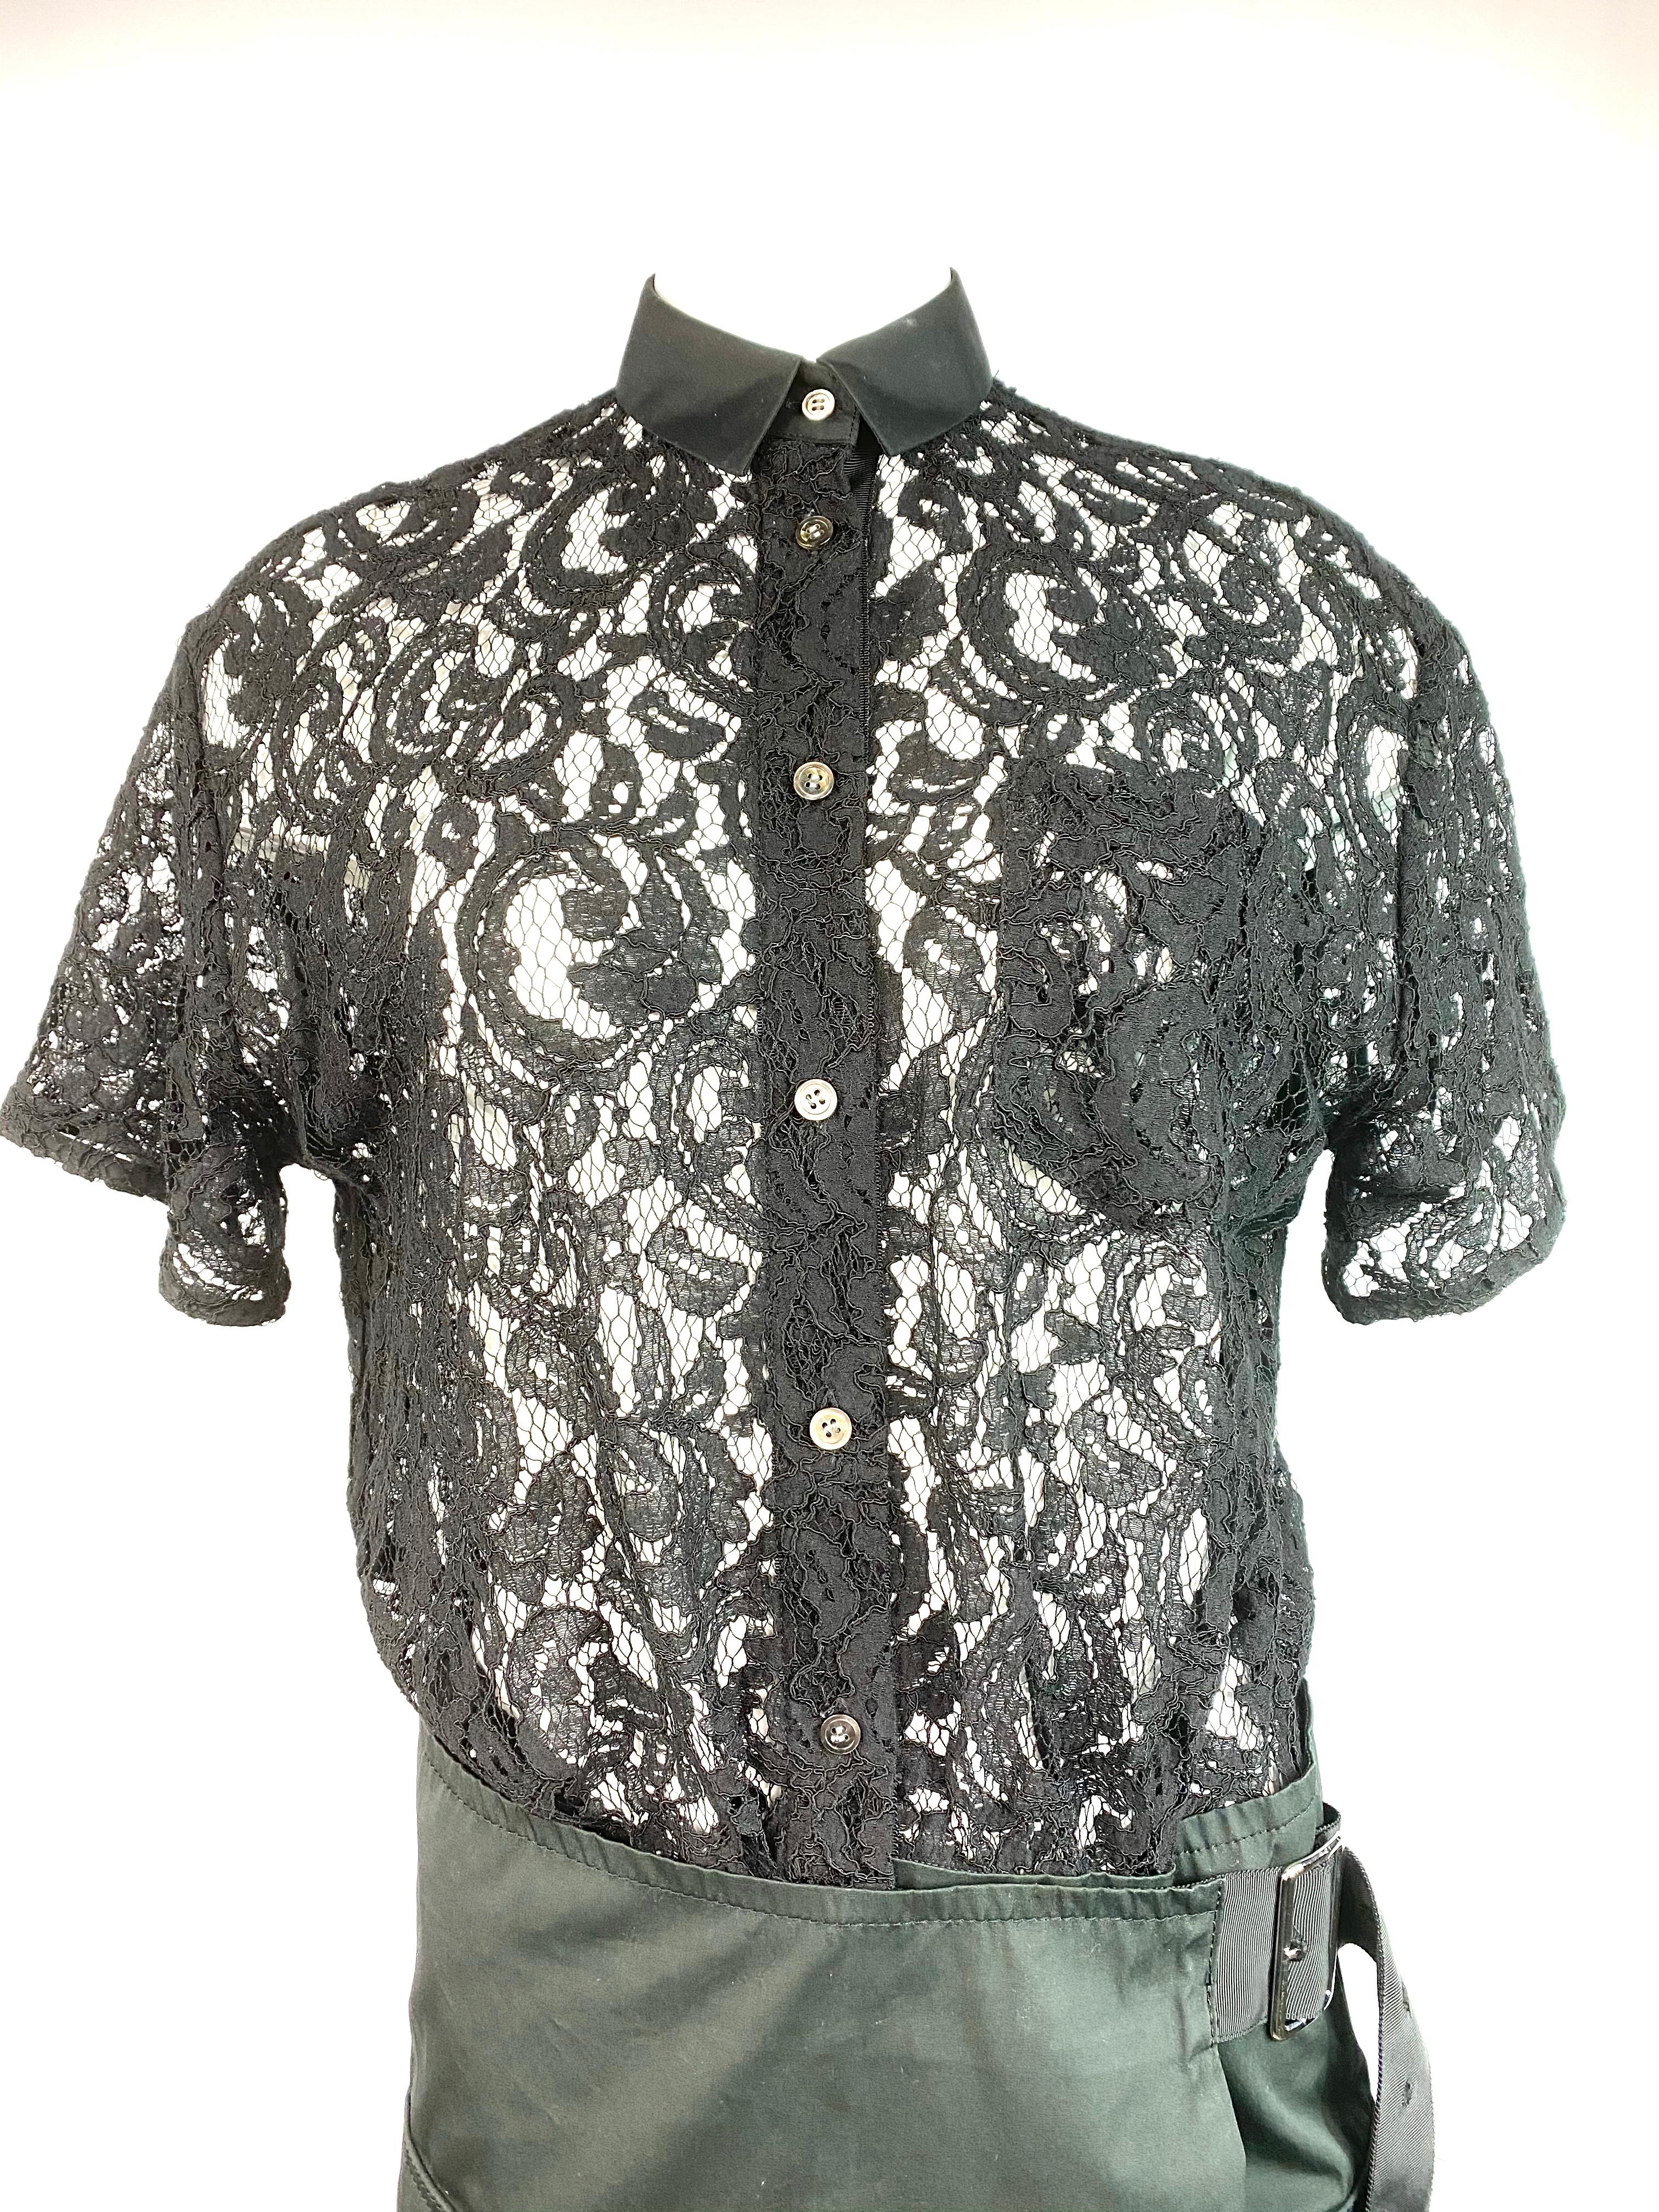 Sacai Luck Black Floral Lace Button- Down Shirt Wrap Mini Dress Size 3

Product details:
Size 3
Button- down top with collar and side pocket detail
Short sleeves
Featuring adjustable belt detail
Waist measures from 30” to 40”
Hips measure from 36”